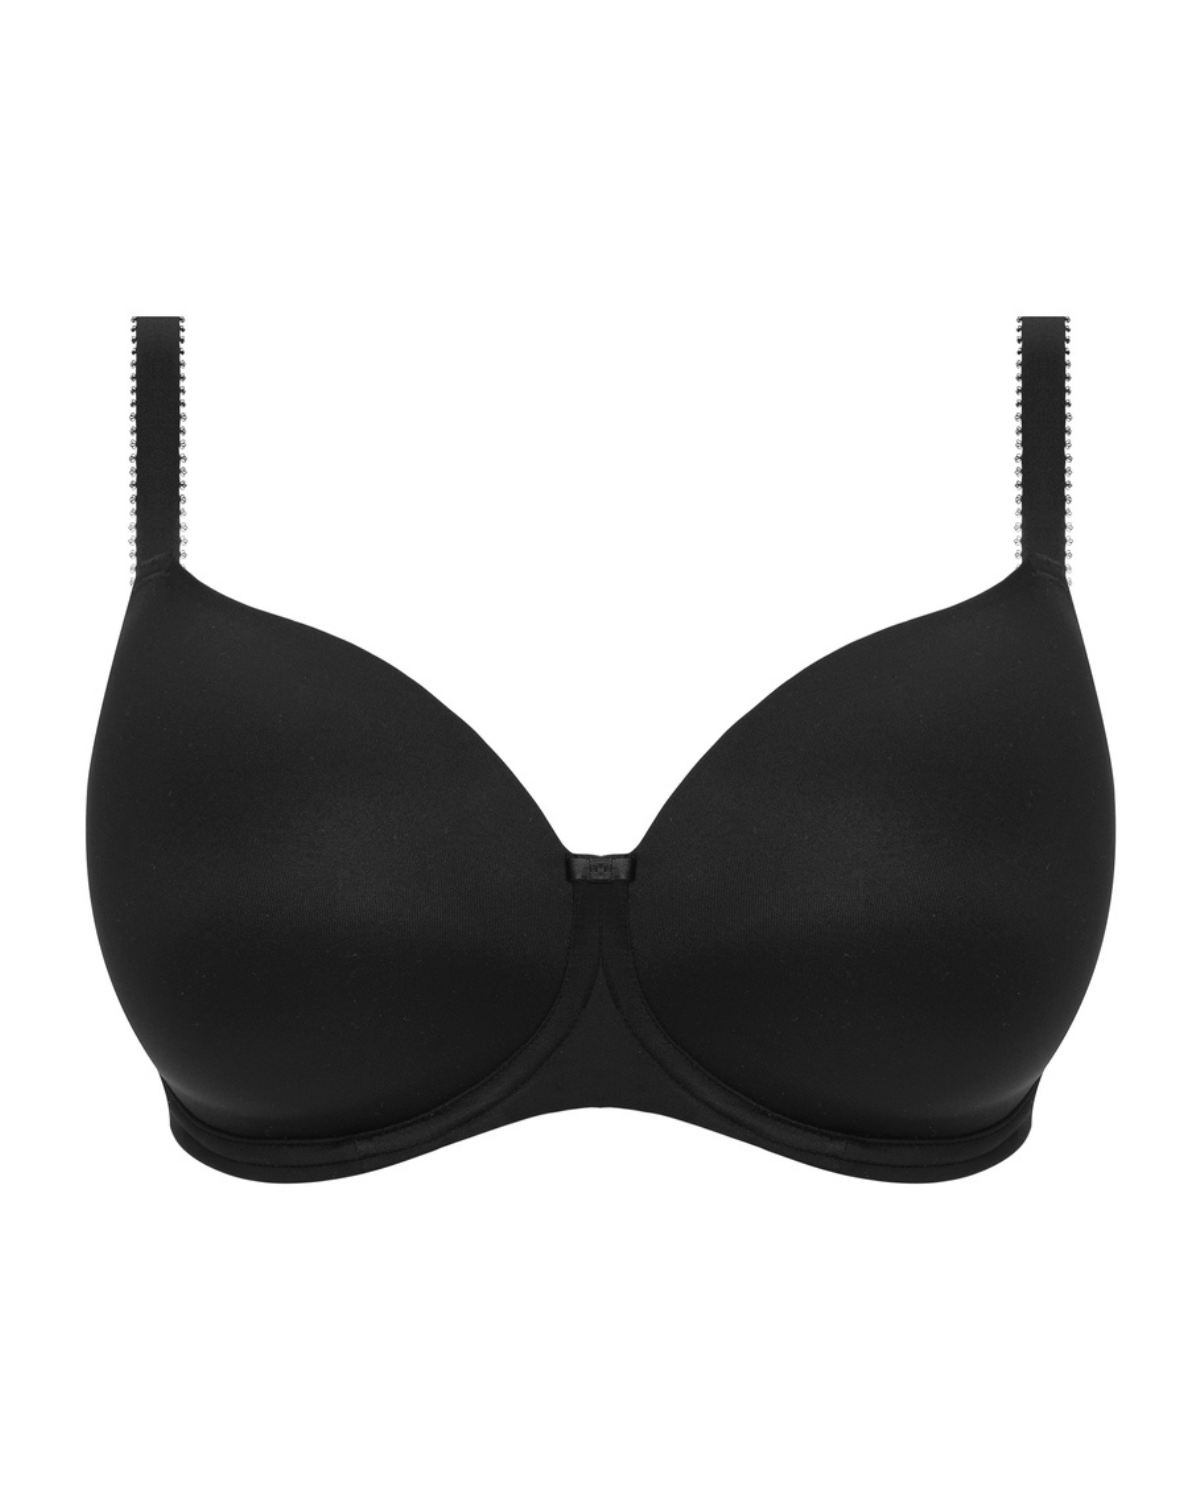 Fantasie Smoothese Underwire Molded Bra (More colors available